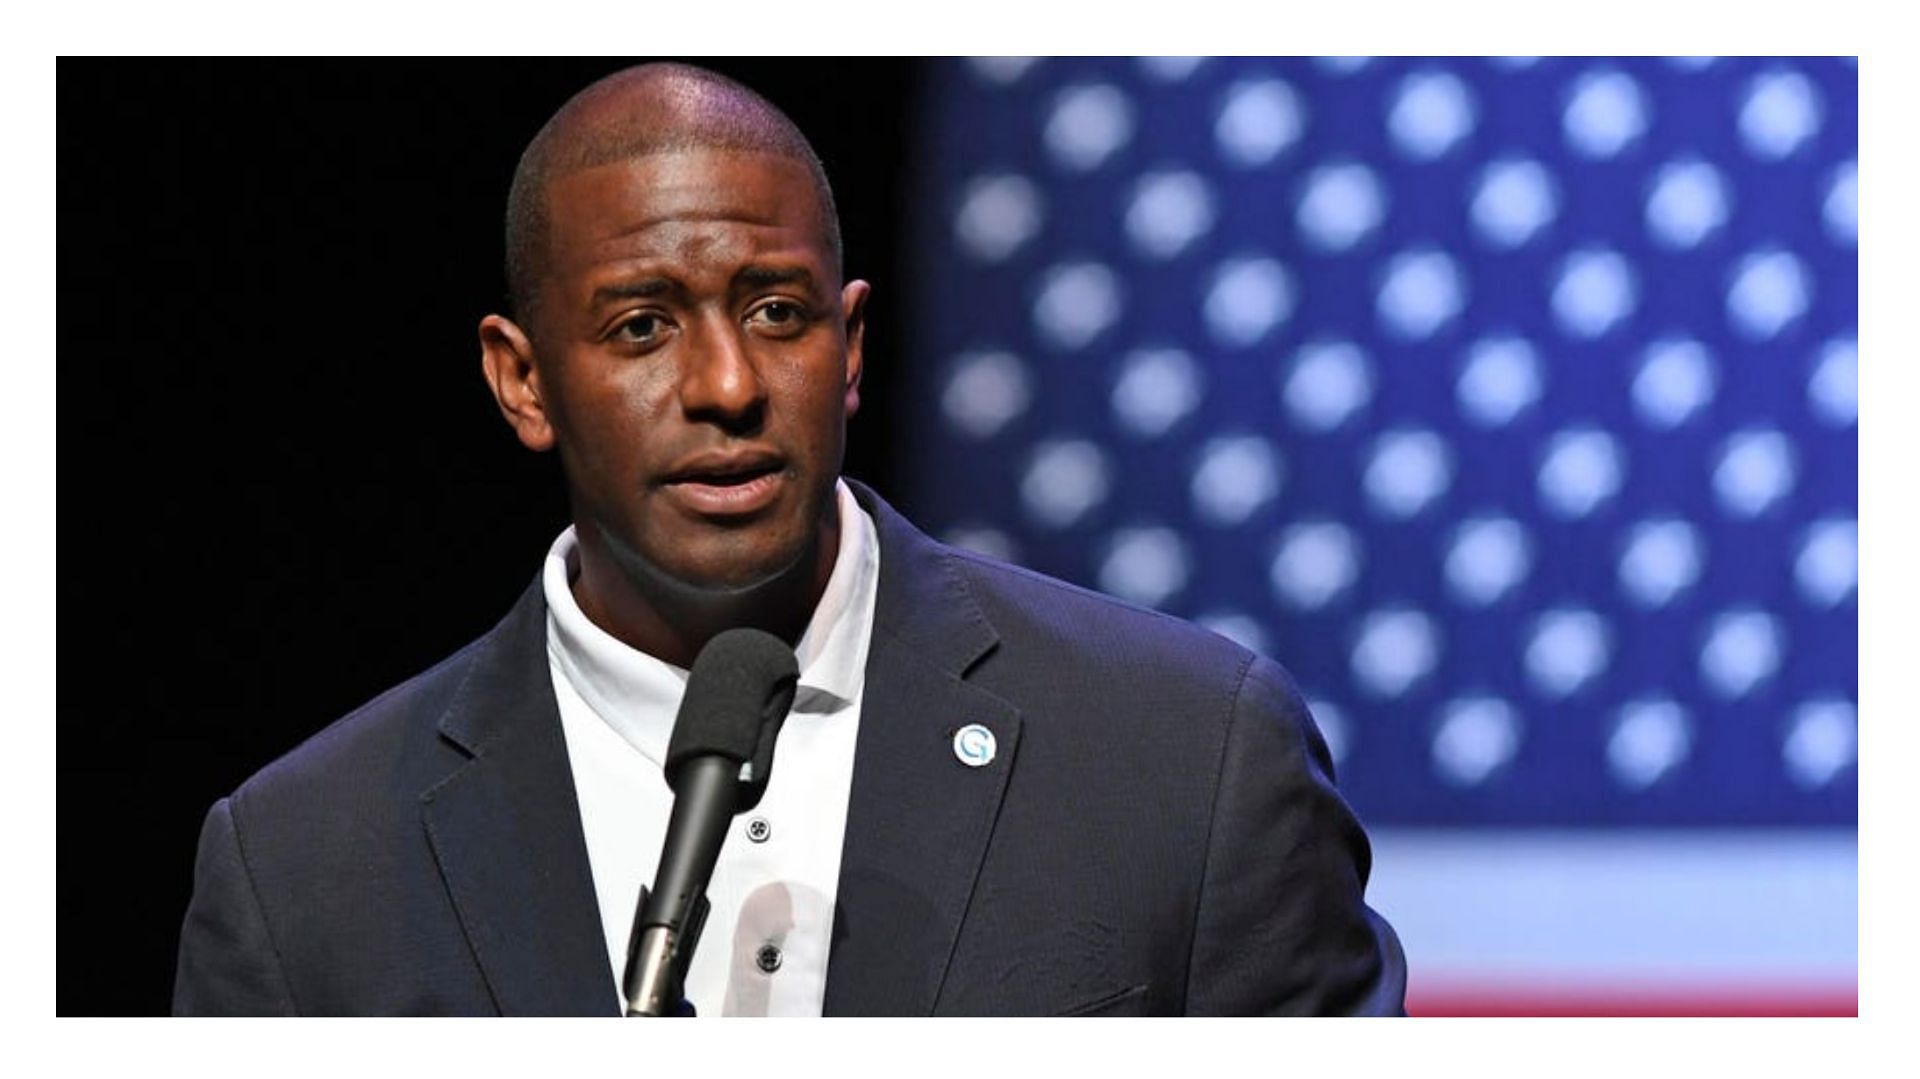 Florida politician Andrew Gillum was indicted for 21 felony charges (image via Getty)